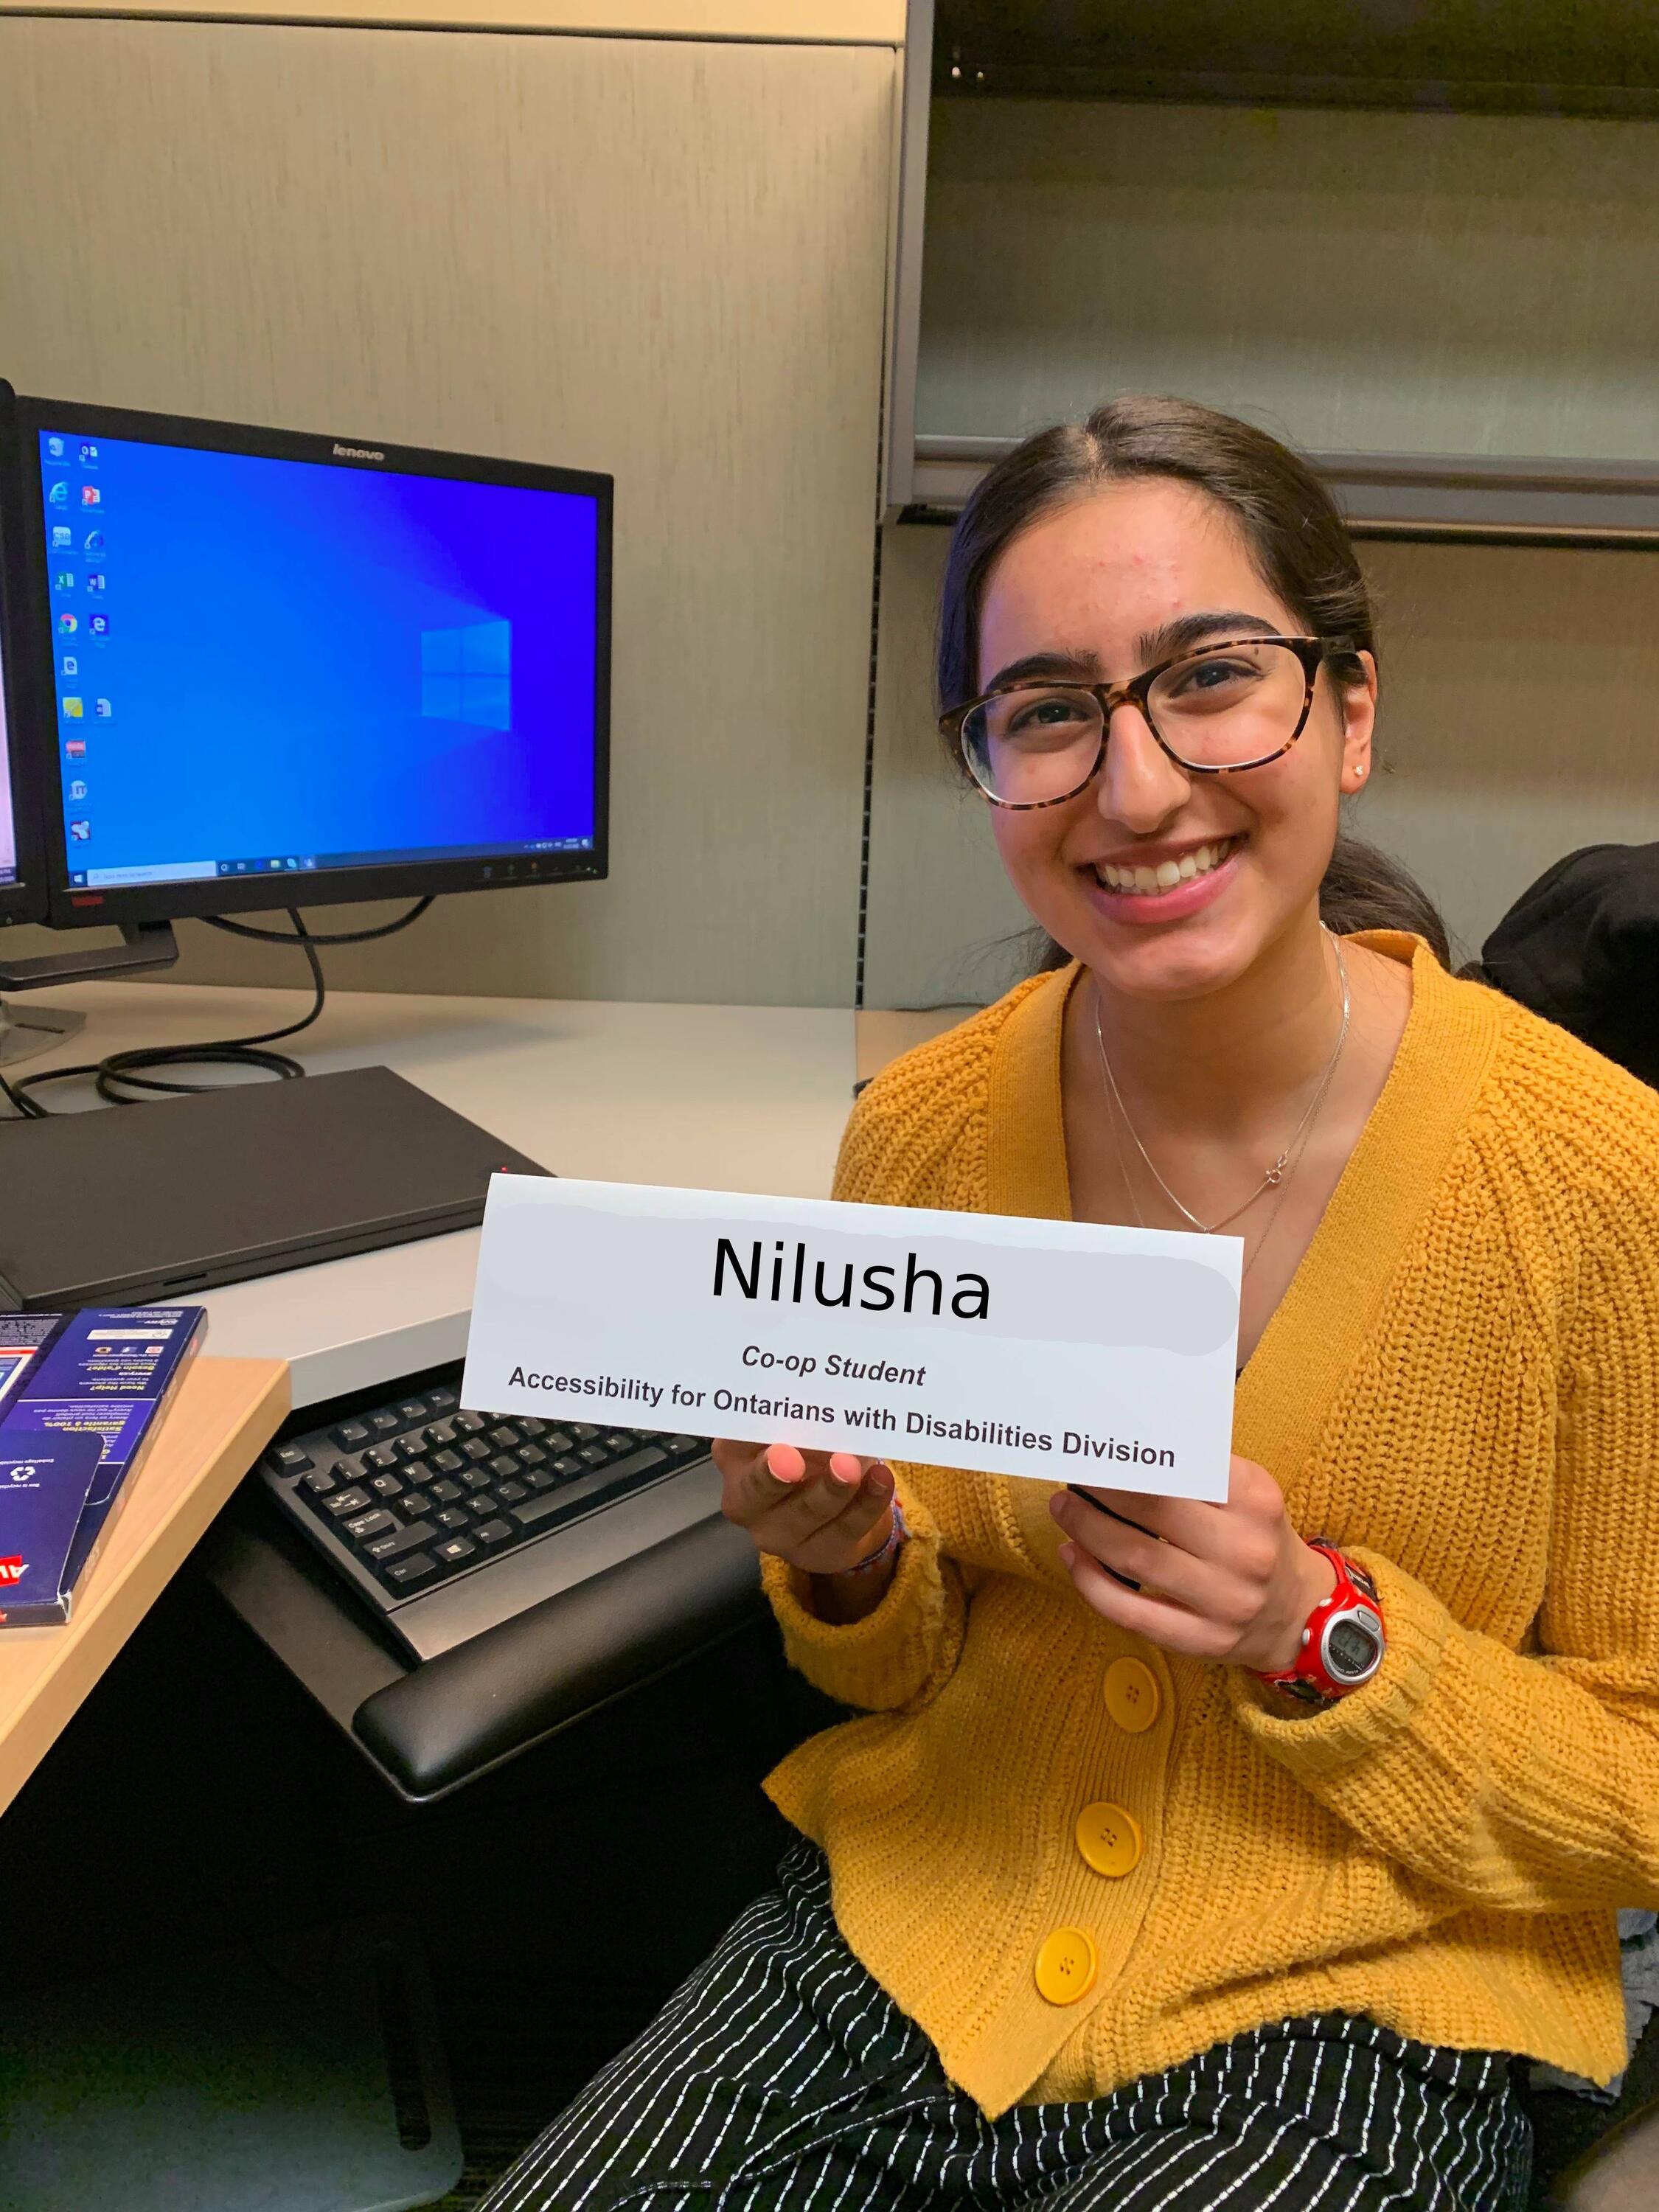 Nilusha smiling with her name tag at work